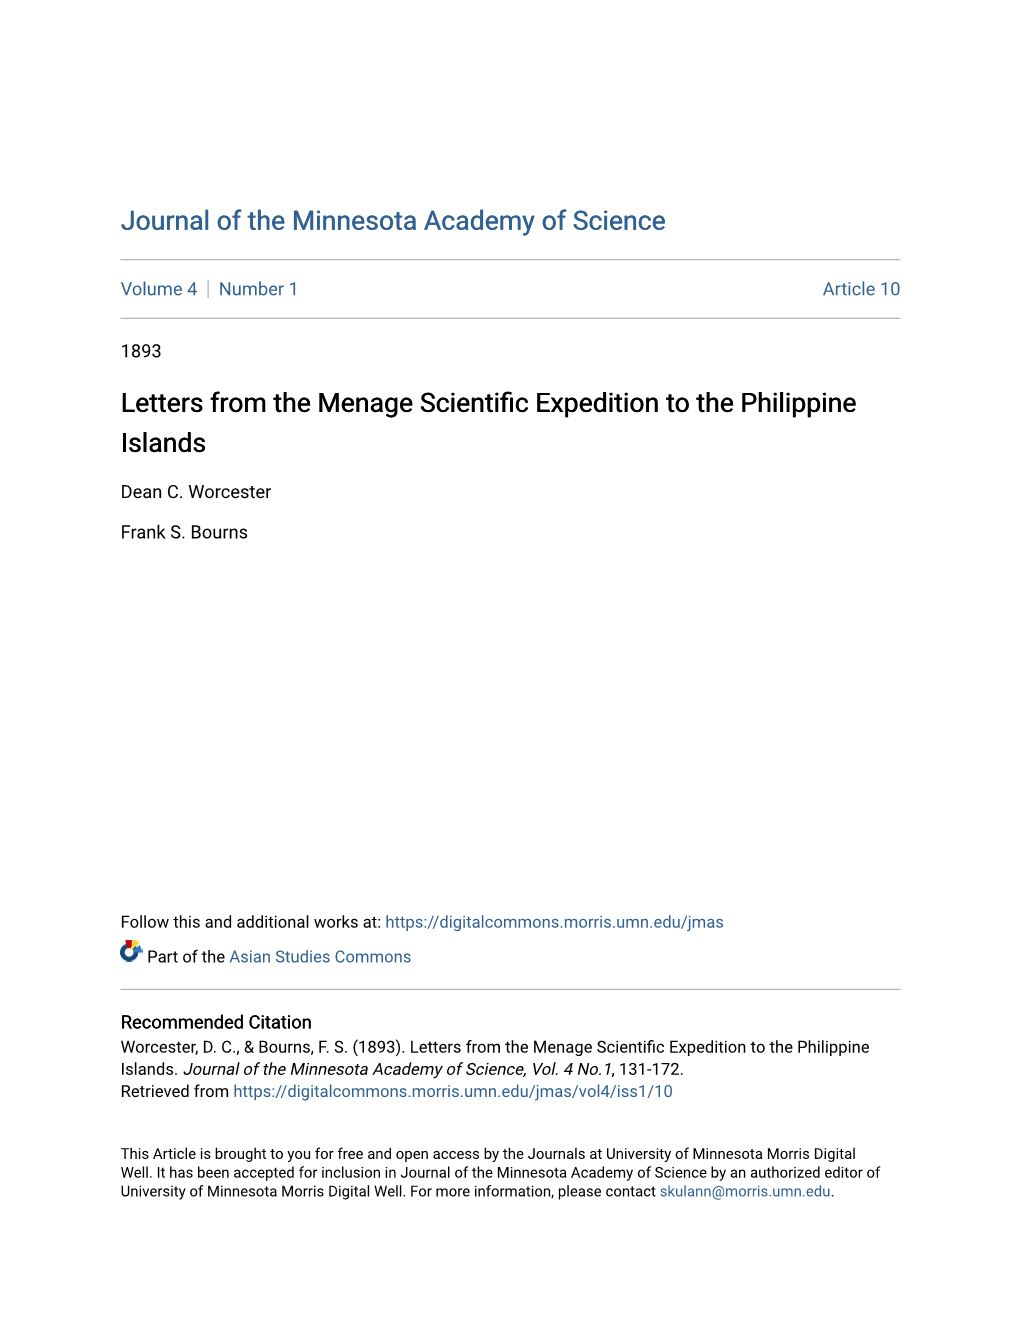 Letters from the Menage Scientific Expedition to the Philippine Islands